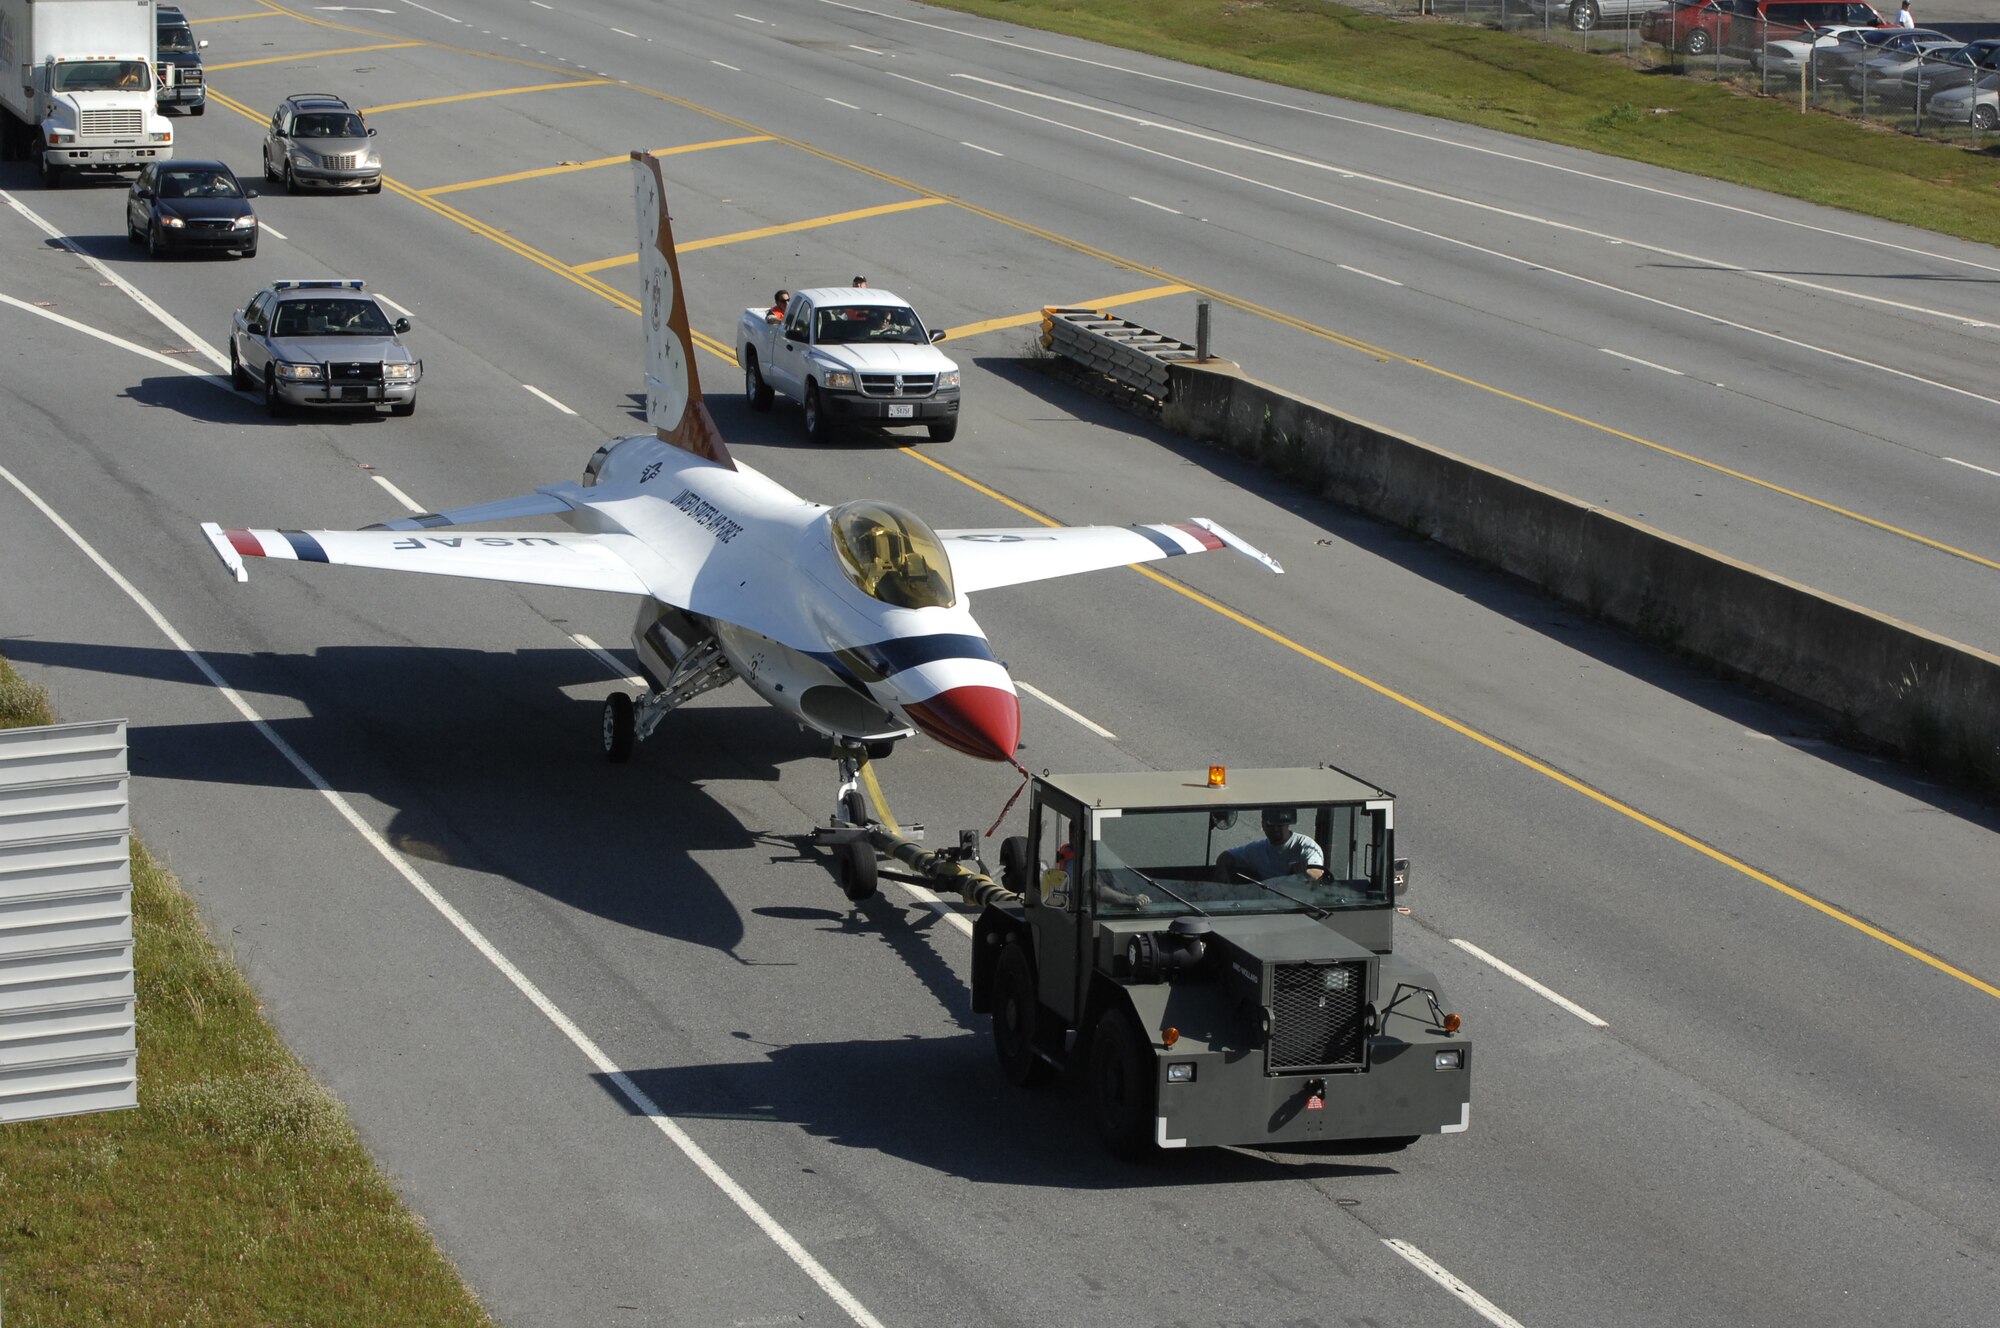 An F-16, formerly part of the Thunderbirds aerial demonstration team from 1982-1991, is towed down 247 to the Museum of Aviation where it is now on display in the Century of Flight hangar. U. S. Air Force photo by Claude Lazzara